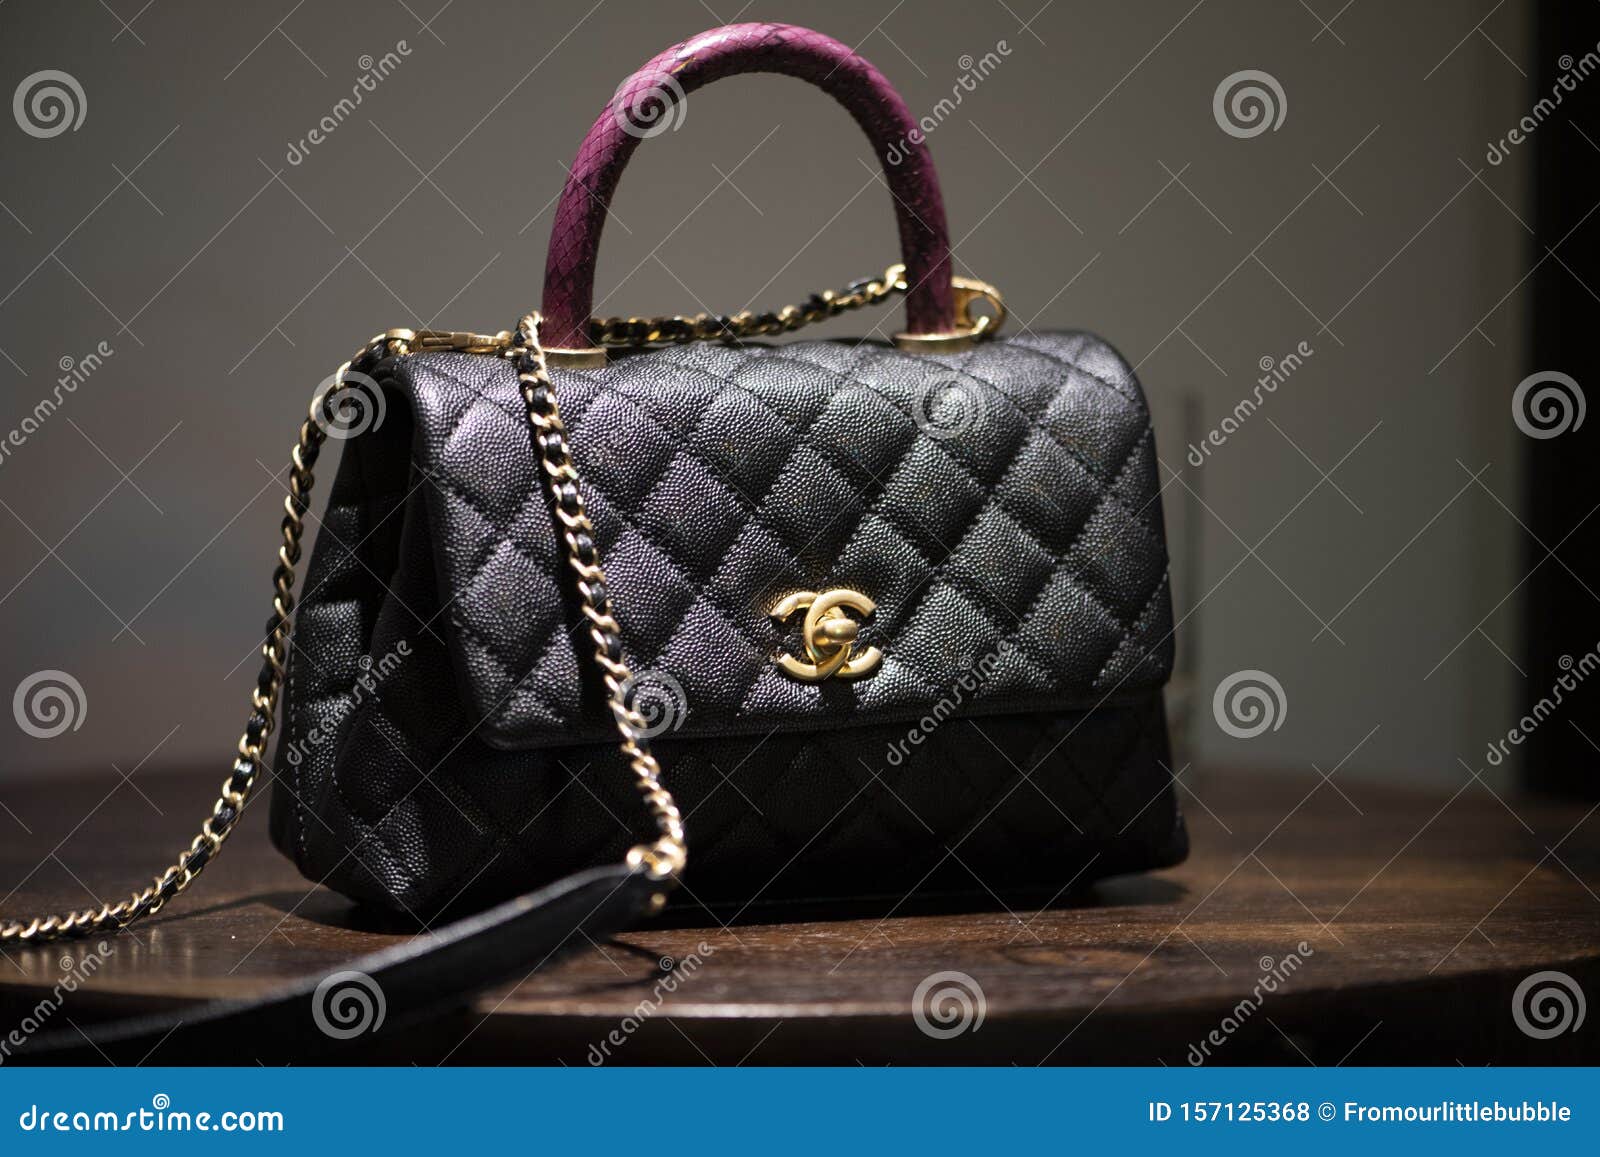 chanel black quilted bag silver chain